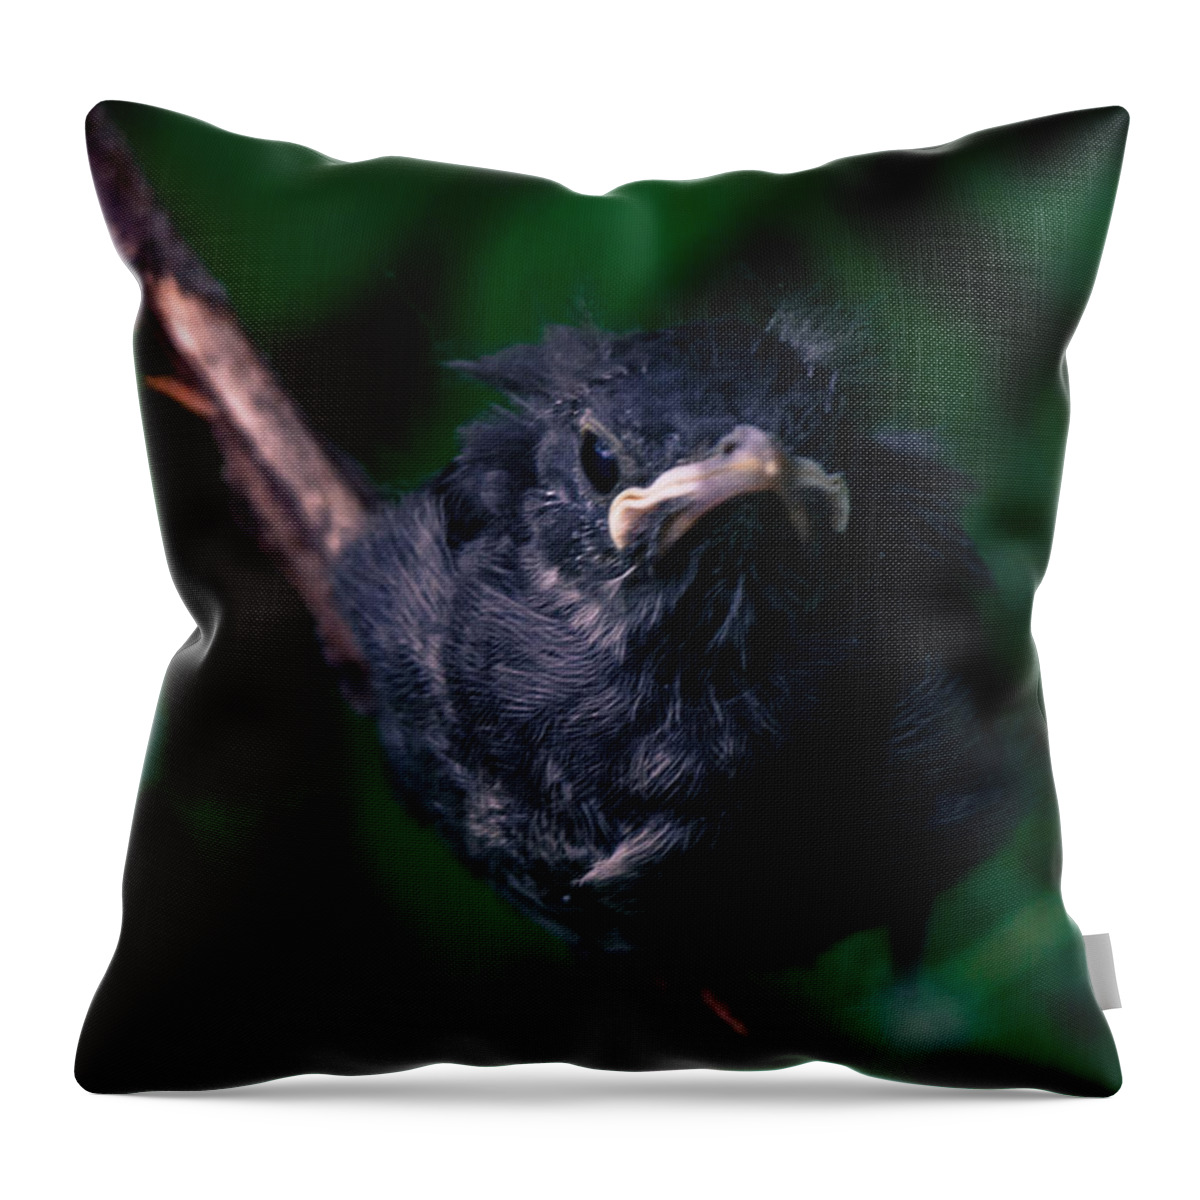 Bird Throw Pillow featuring the photograph Birdie by Kristin Hunt